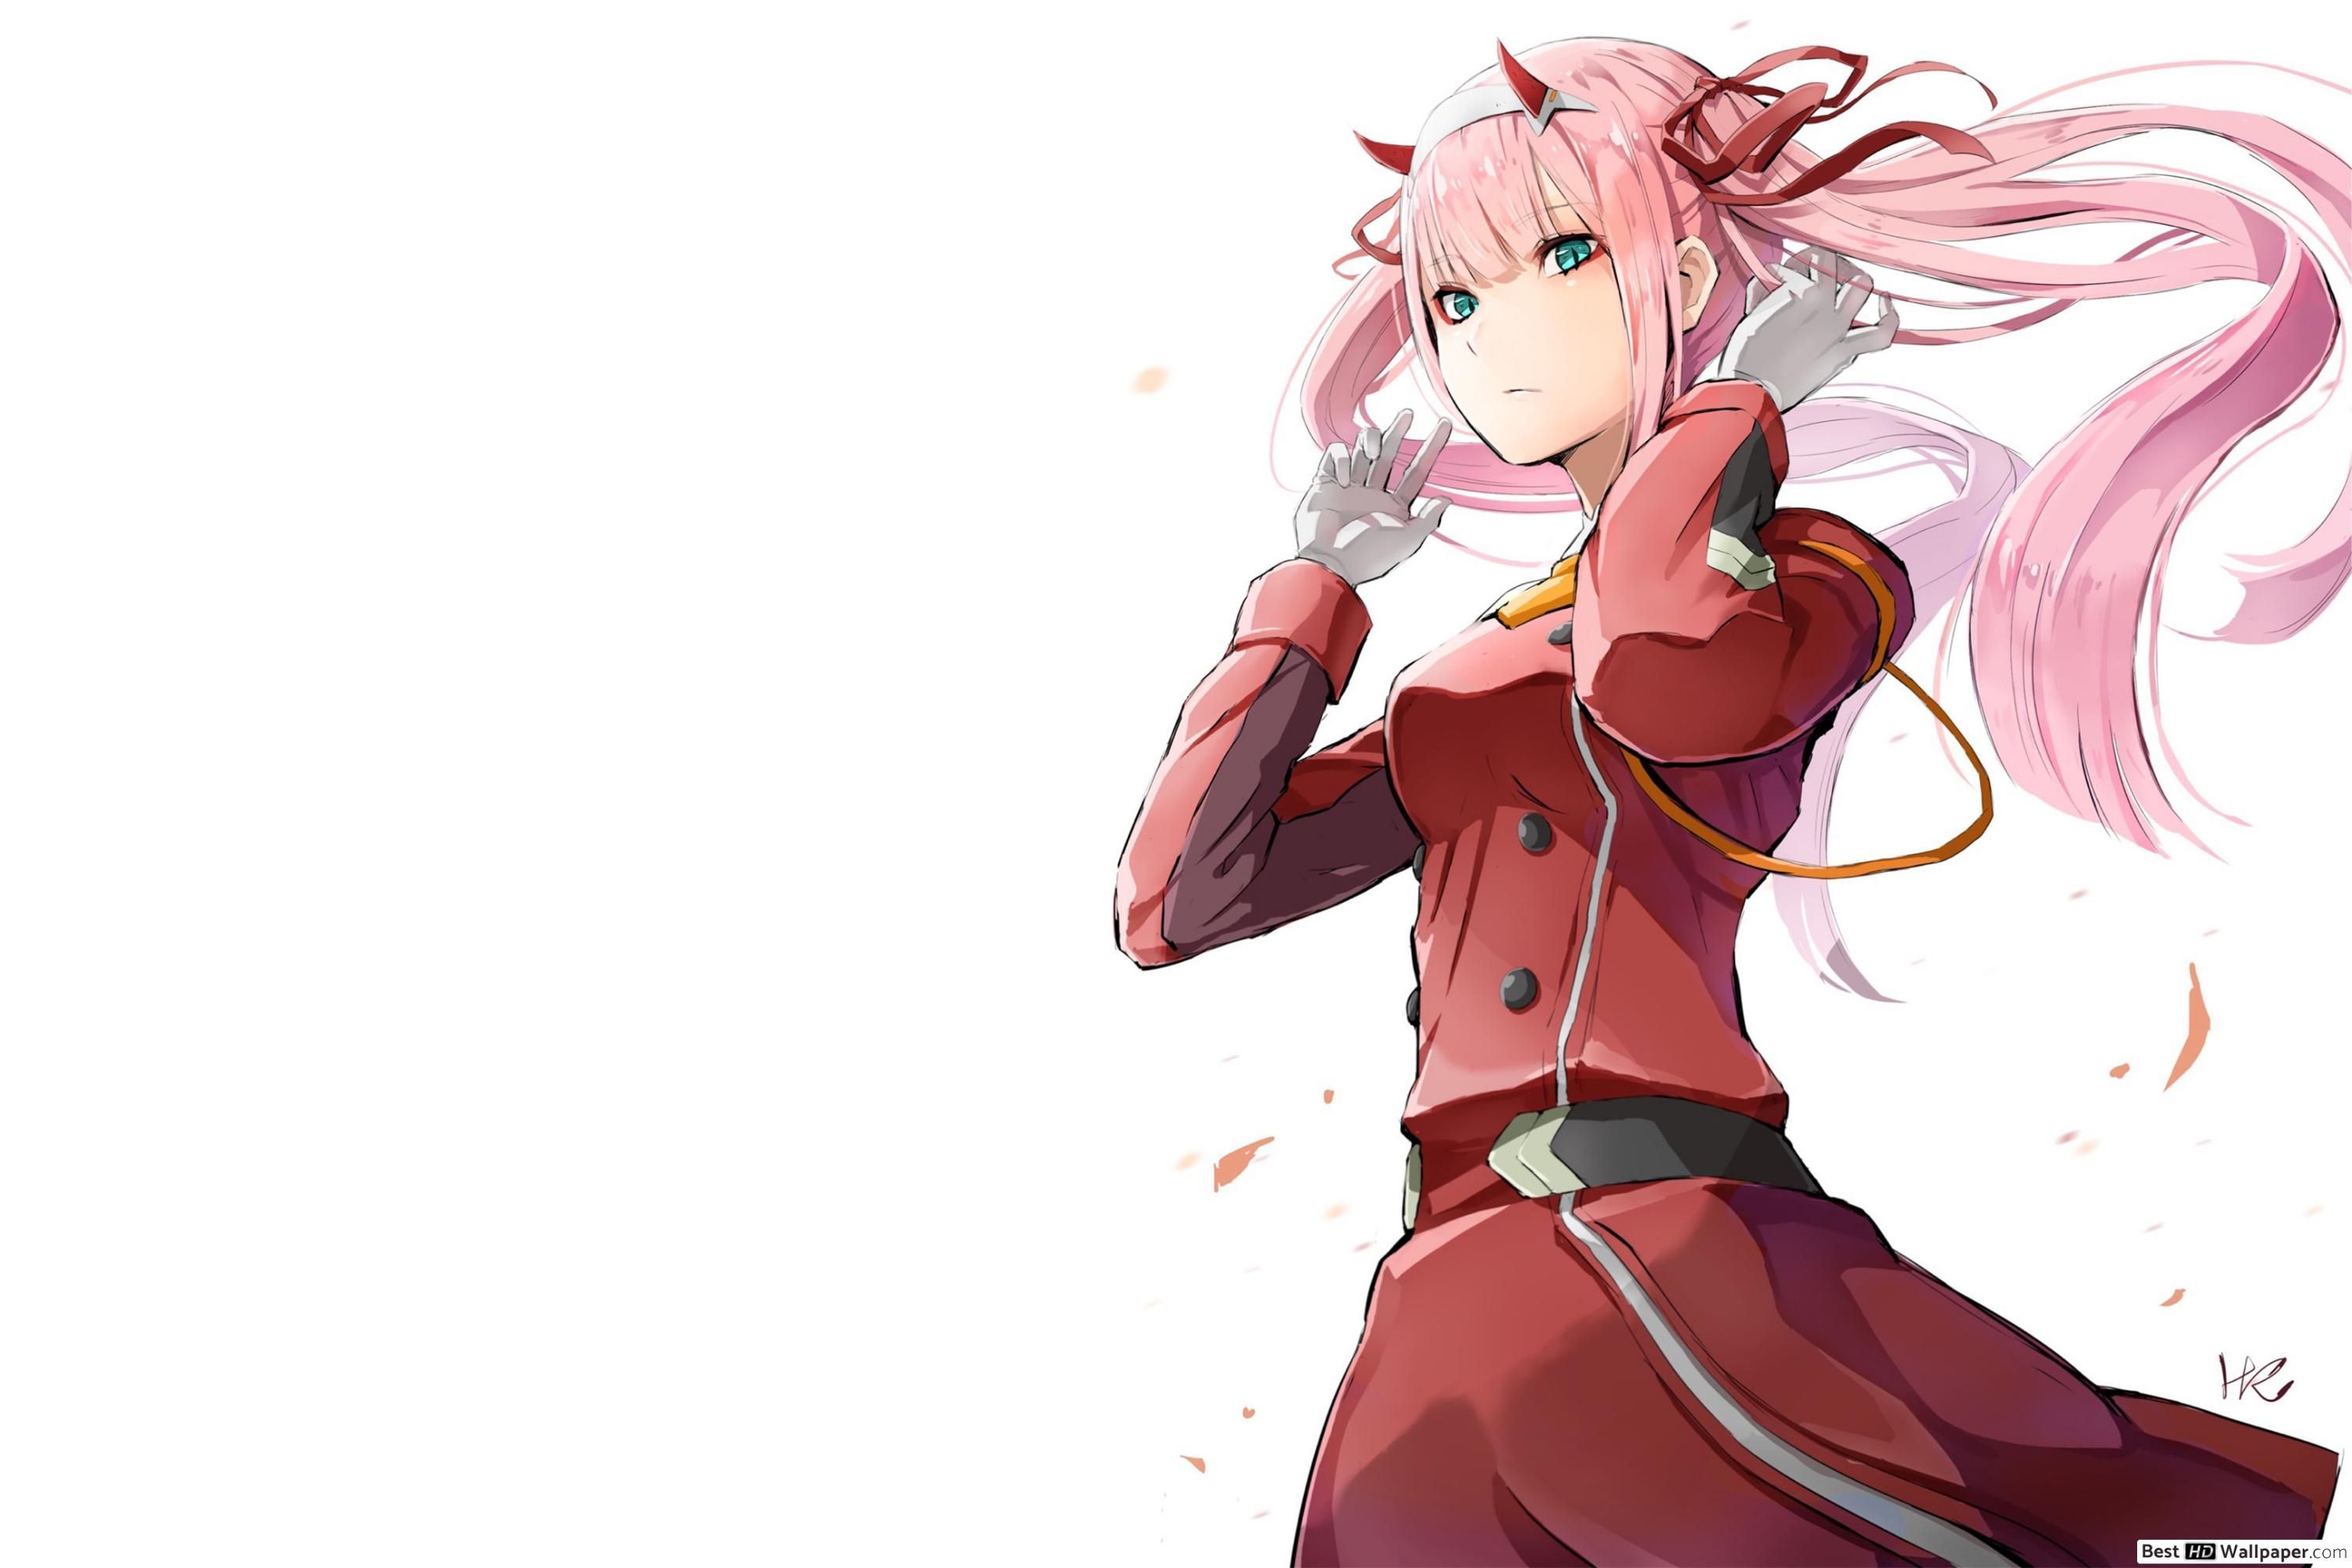  Aesthetic  Zero Two  Cute Wallpapers  Wallpaper  Cave